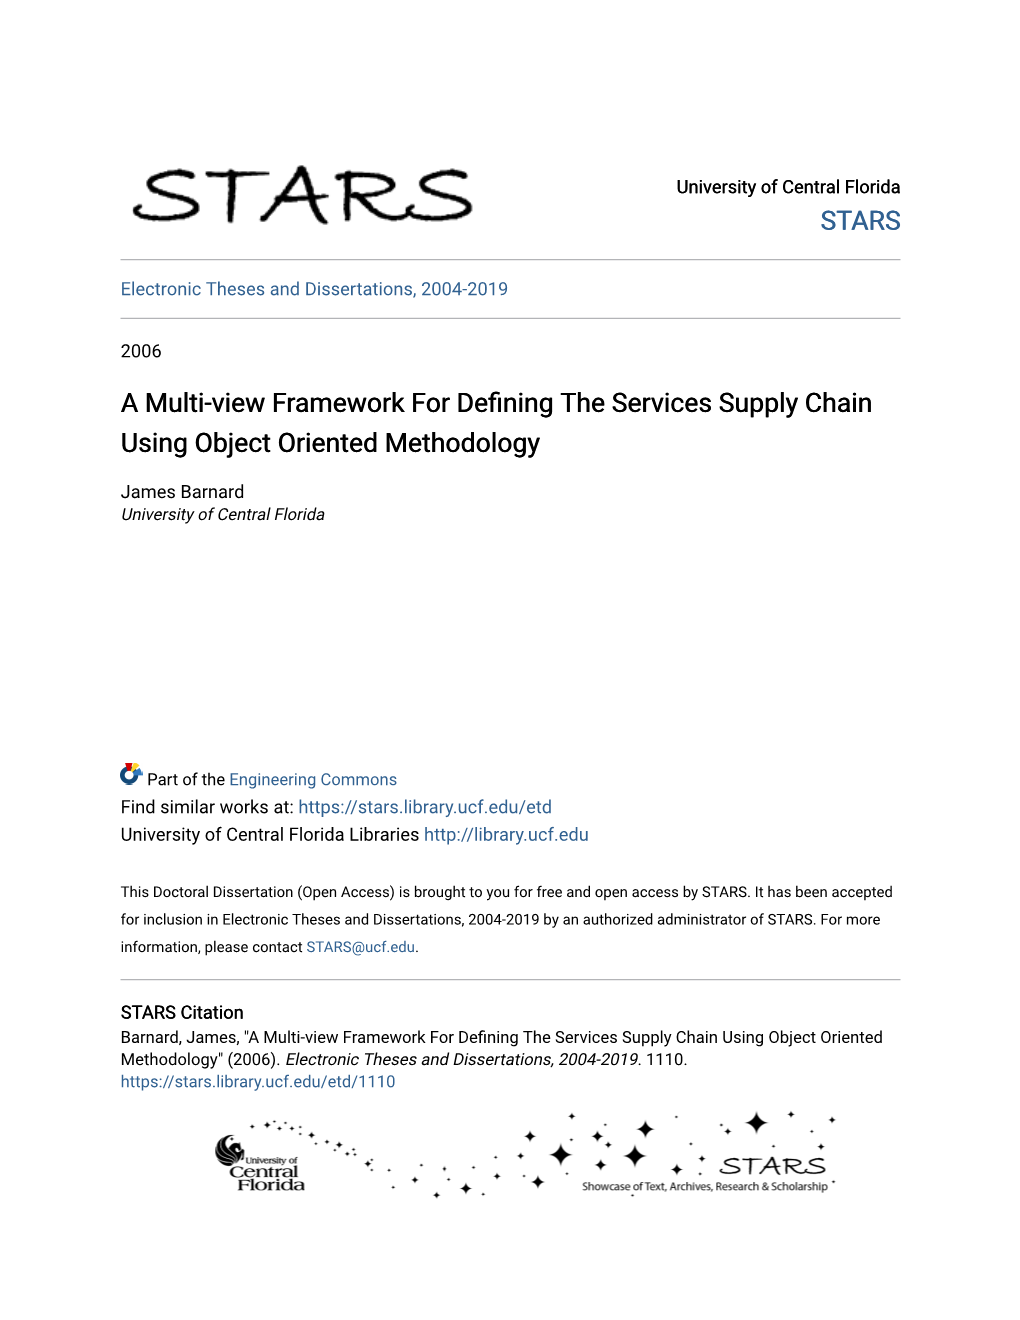 A Multi-View Framework for Defining the Services Supply Chain Using Object Oriented Methodology